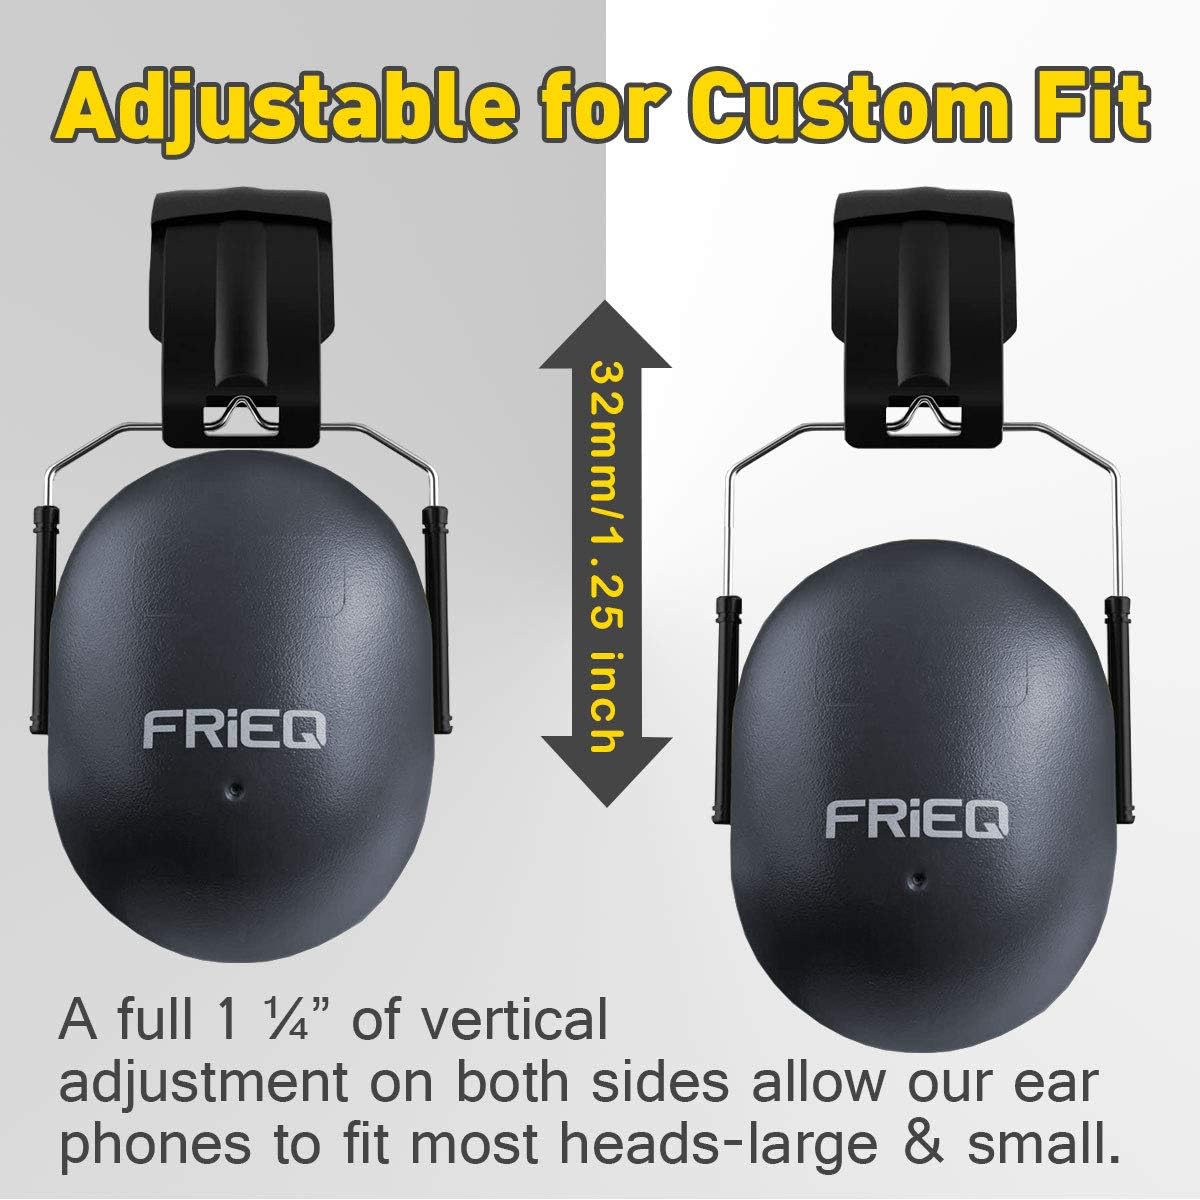 FRiEQ 37 dB NRR Sound Technology Safety Ear Muffs with LRPu Foam for Shooting, Music & Yard Work 2 Pack (Space Grey) - Large & Small